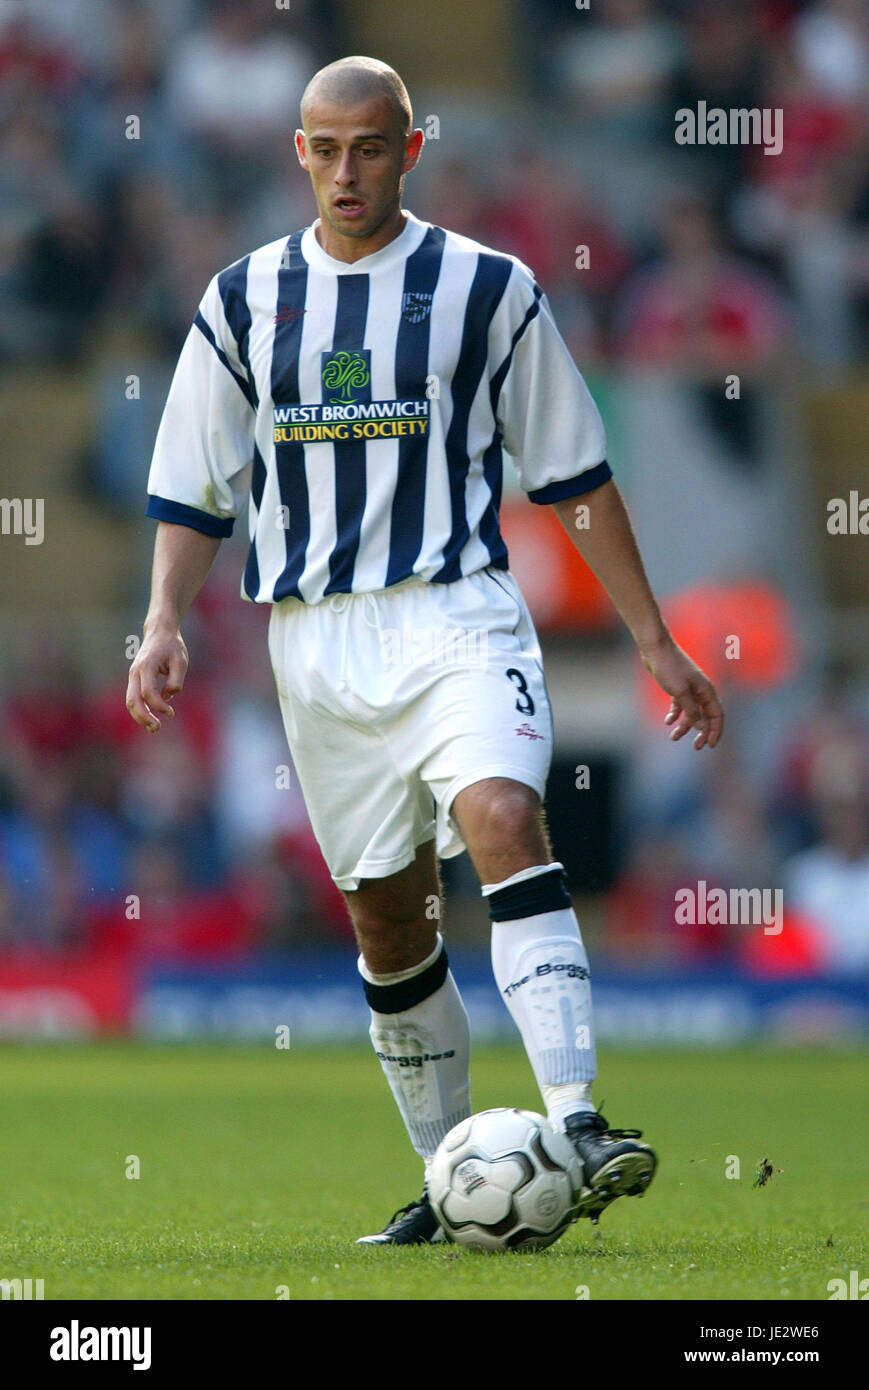 NEIL CLEMENT WEST BROMWICH ALBION FC ANFIELD LIVERPOOL 21 September 2002 Stock Photo